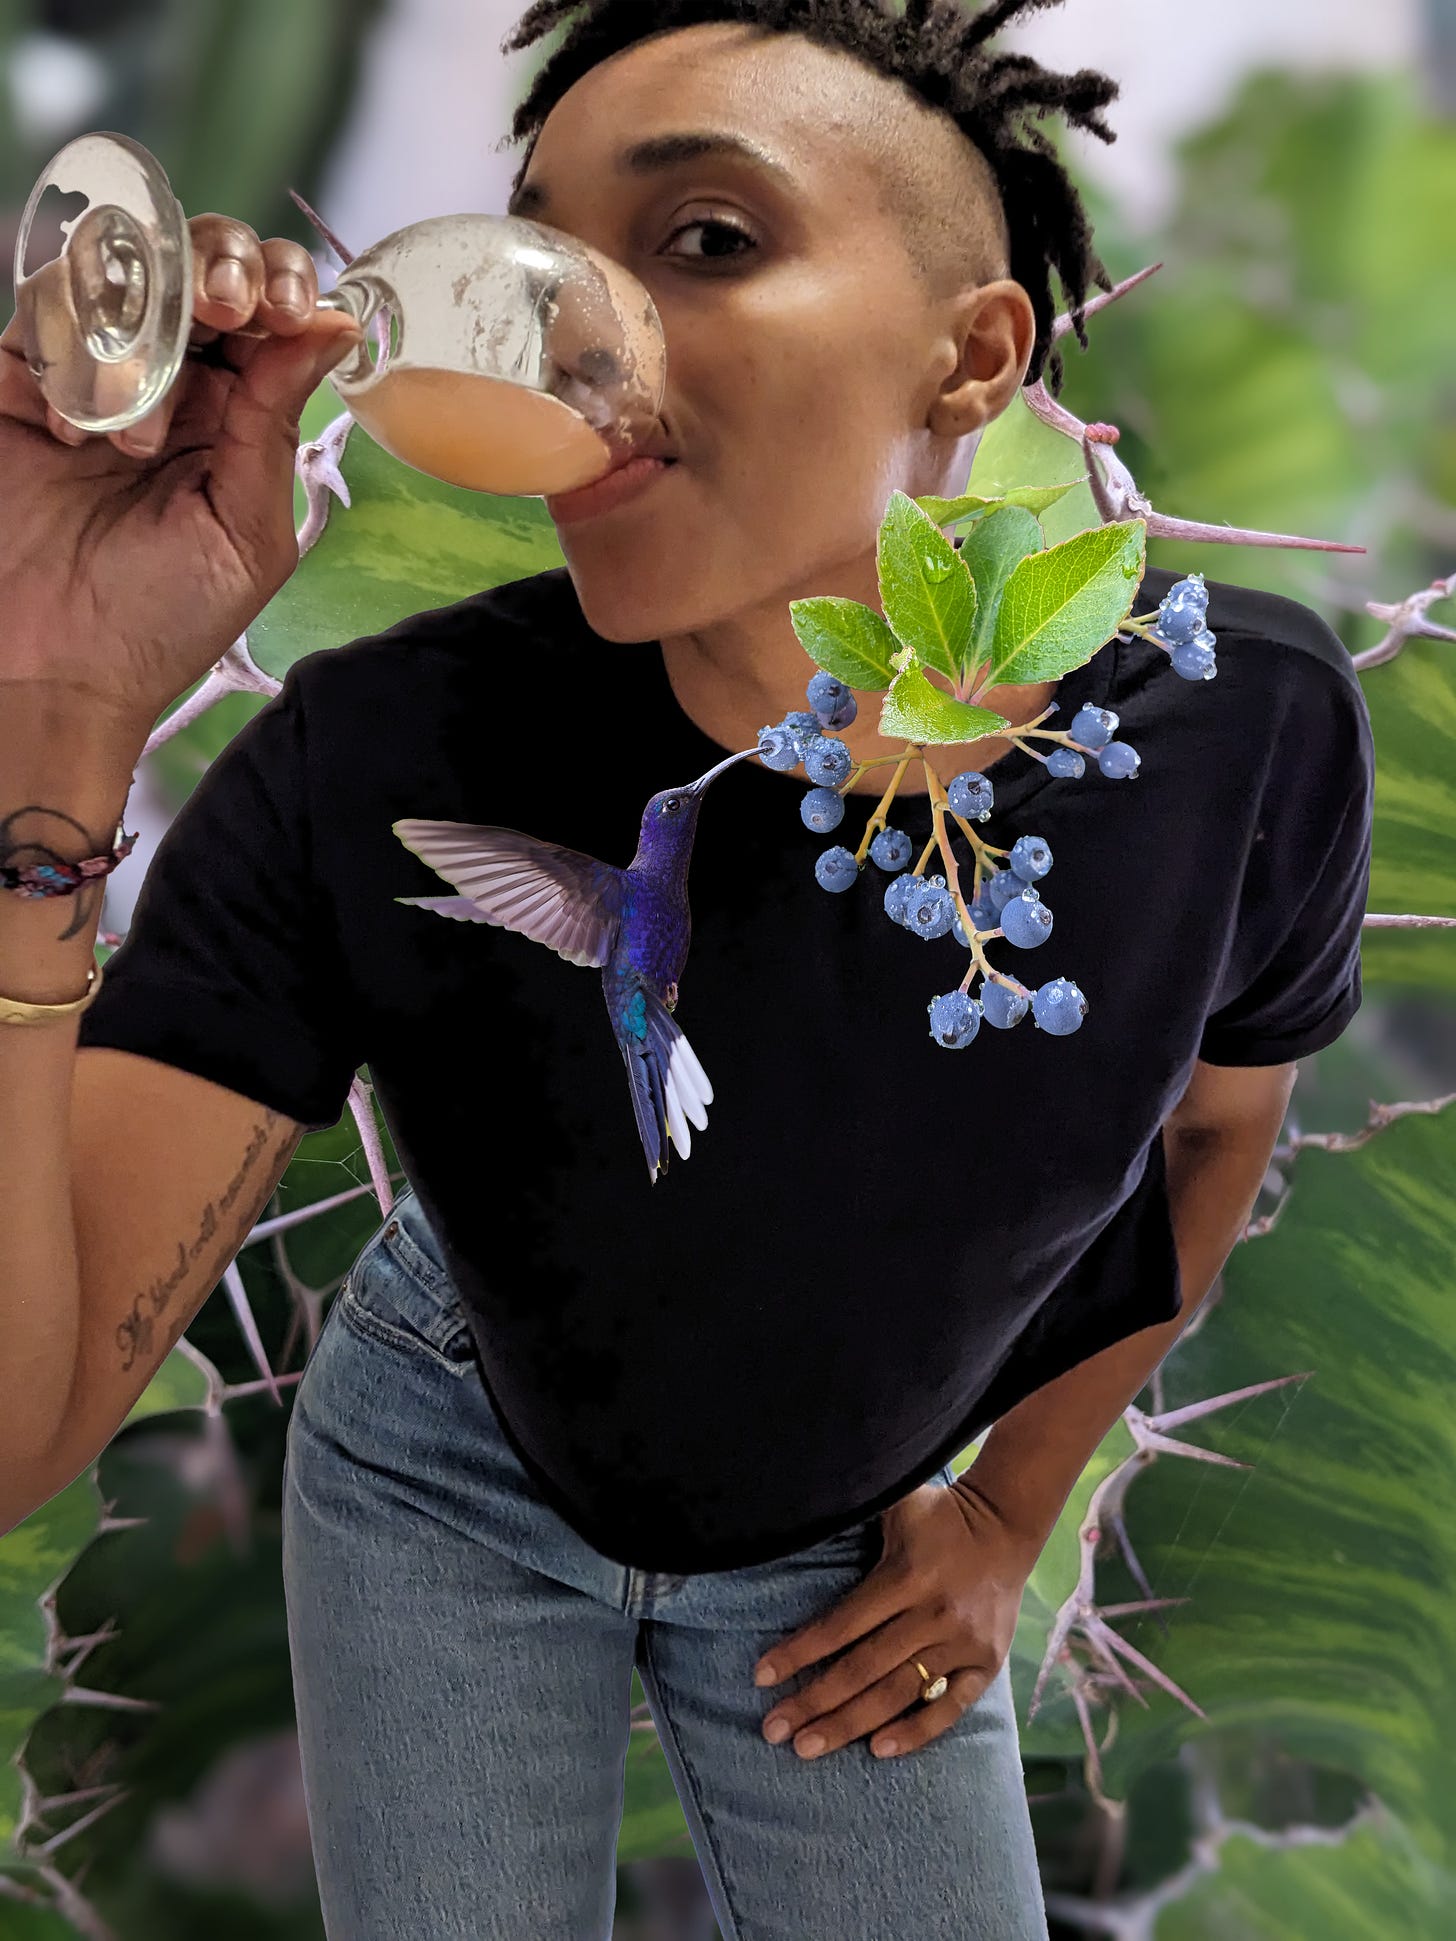 A photo collage of zel, plants & a hummingbird